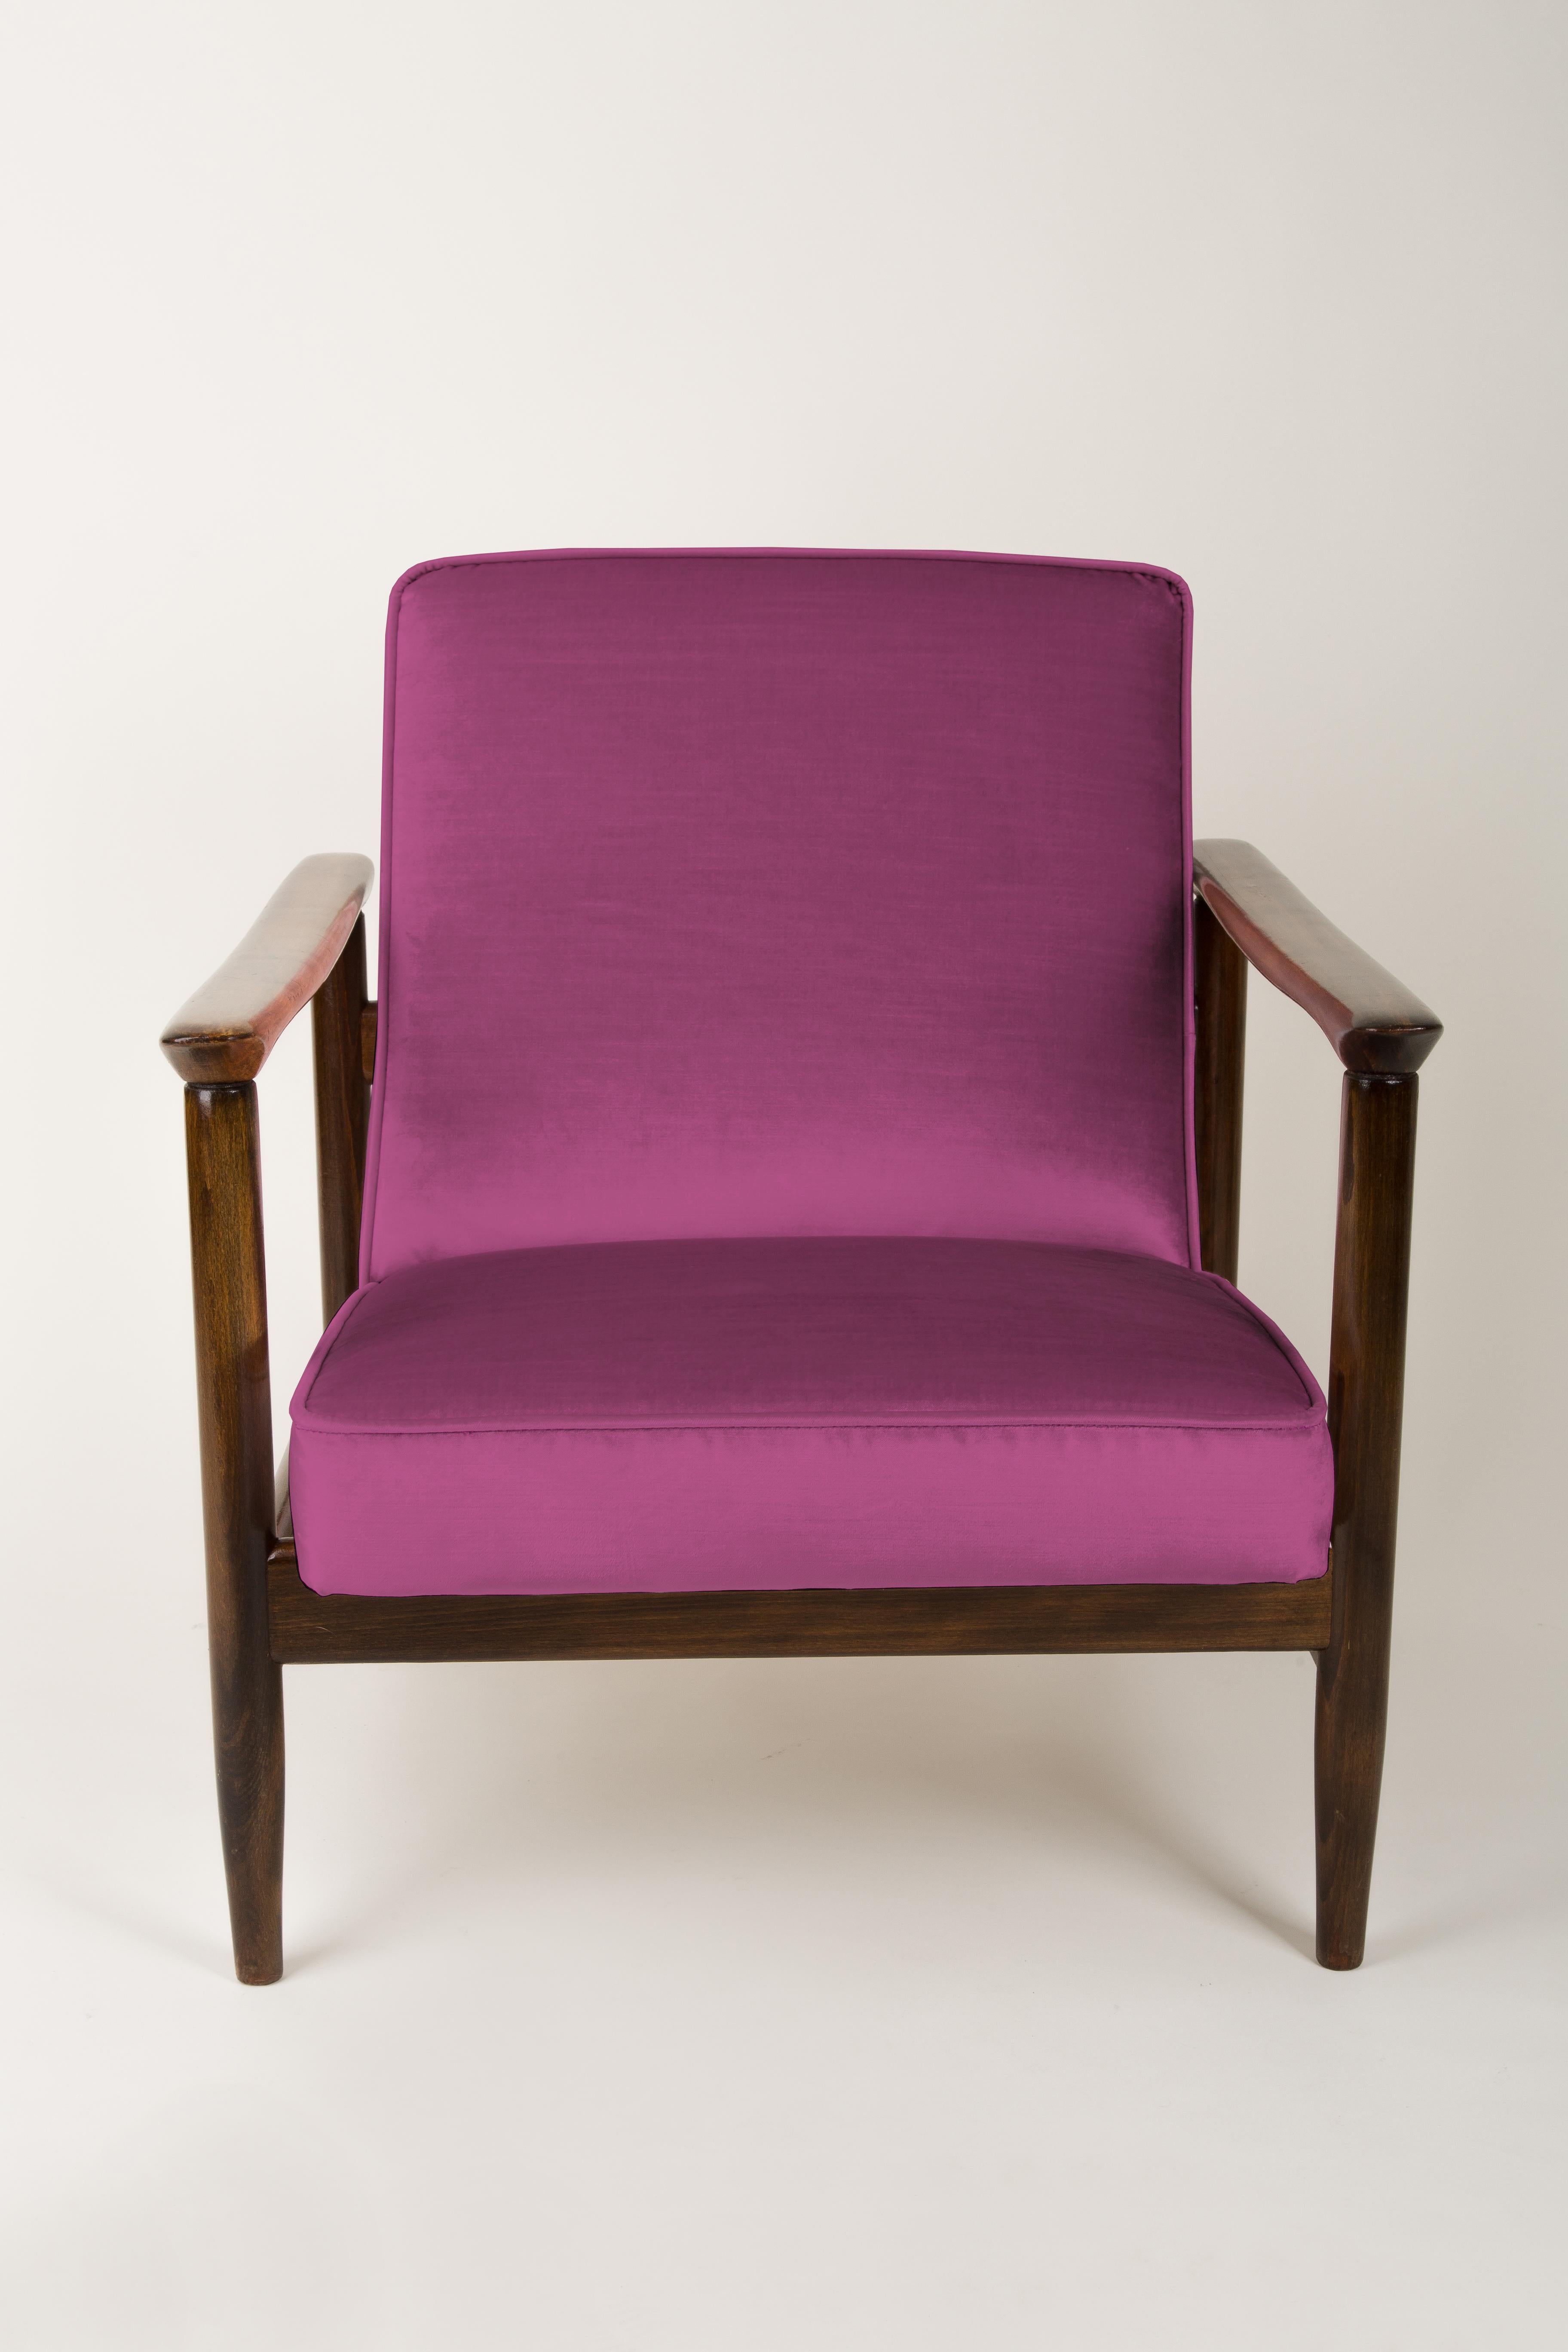 Pair of Pink Armchairs, Edmund Homa, GFM-142, 1960s, Poland In Excellent Condition For Sale In 05-080 Hornowek, PL